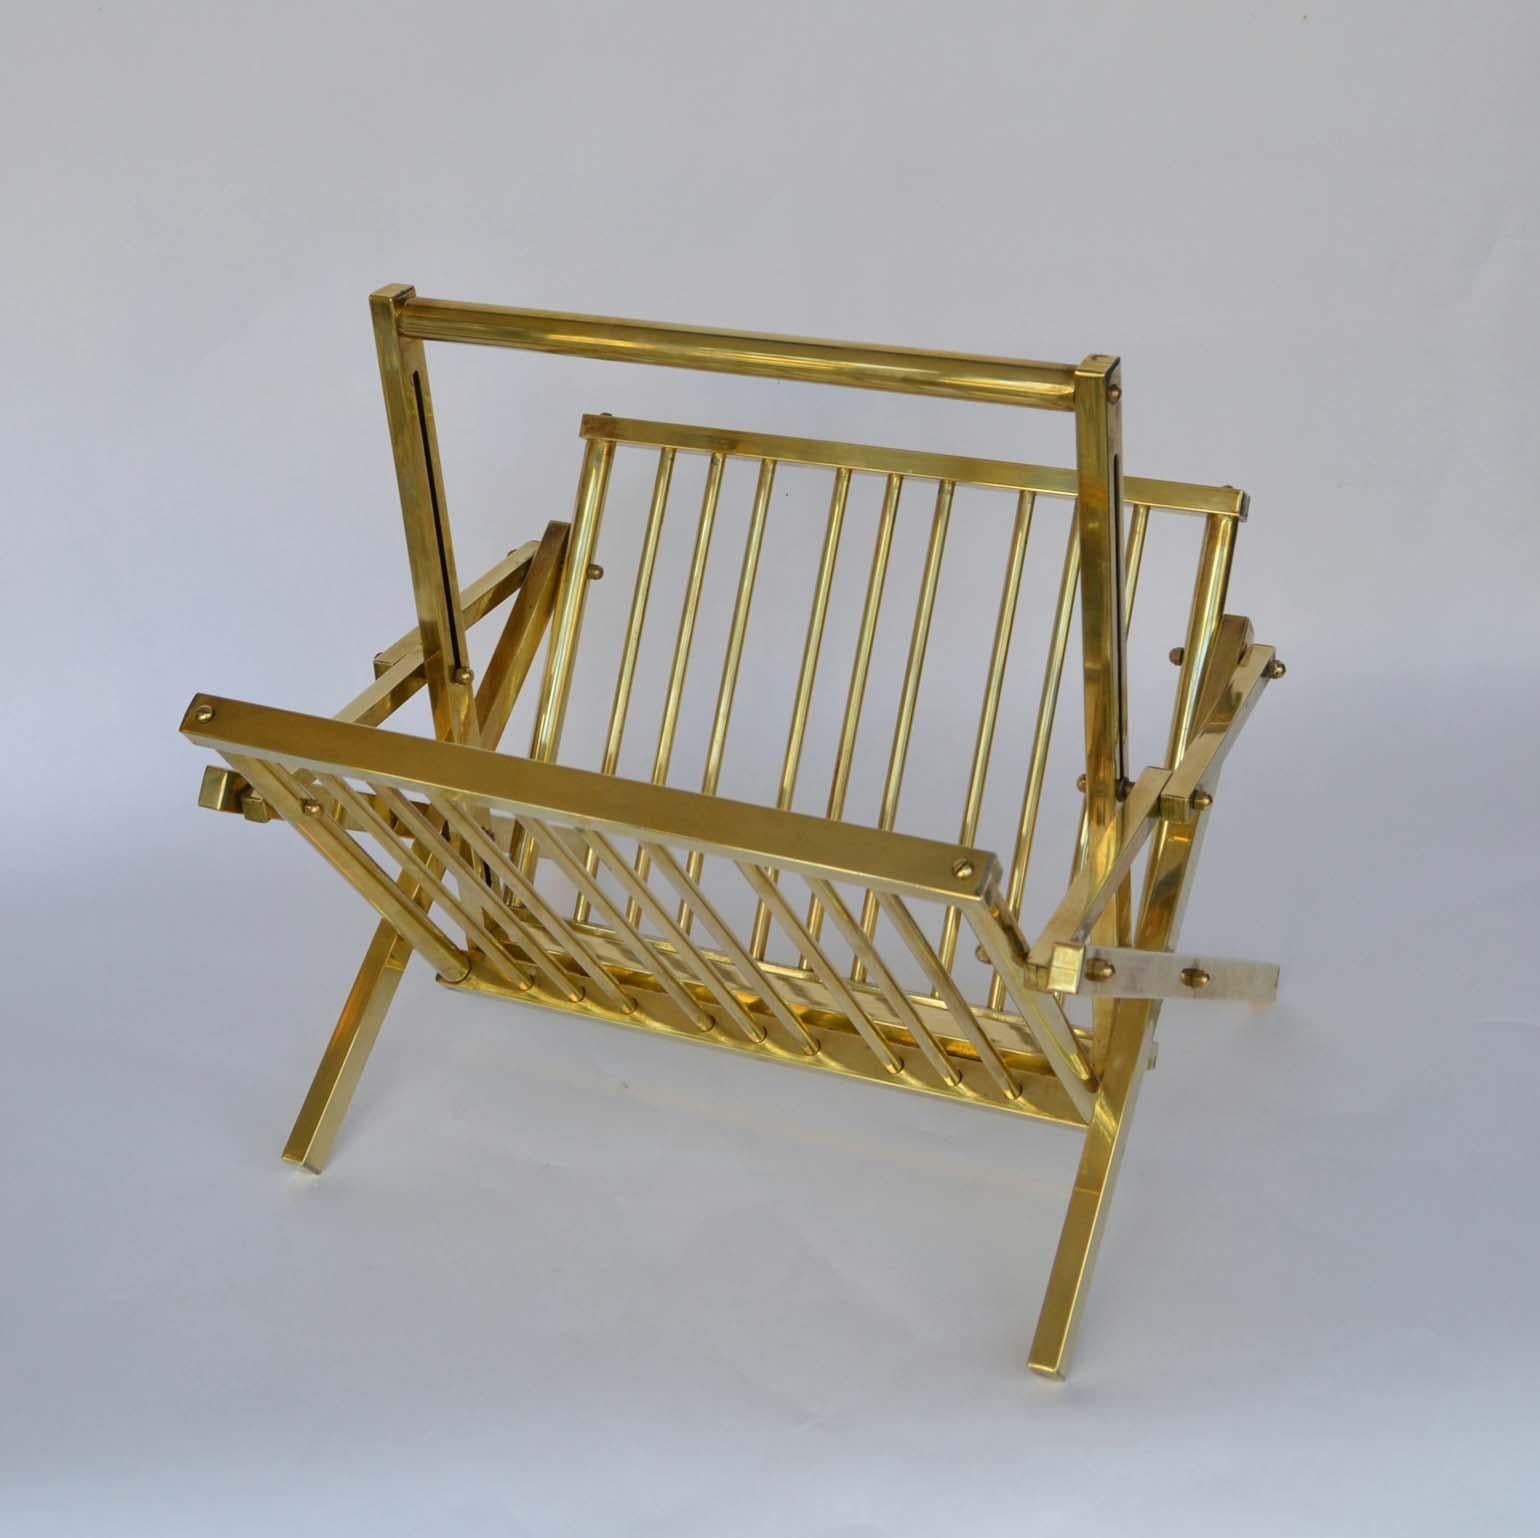 Stylish midcentury magazine rack in polished tubular brass. 
It is collapsable, when folded it measures 49x42x6 cm.